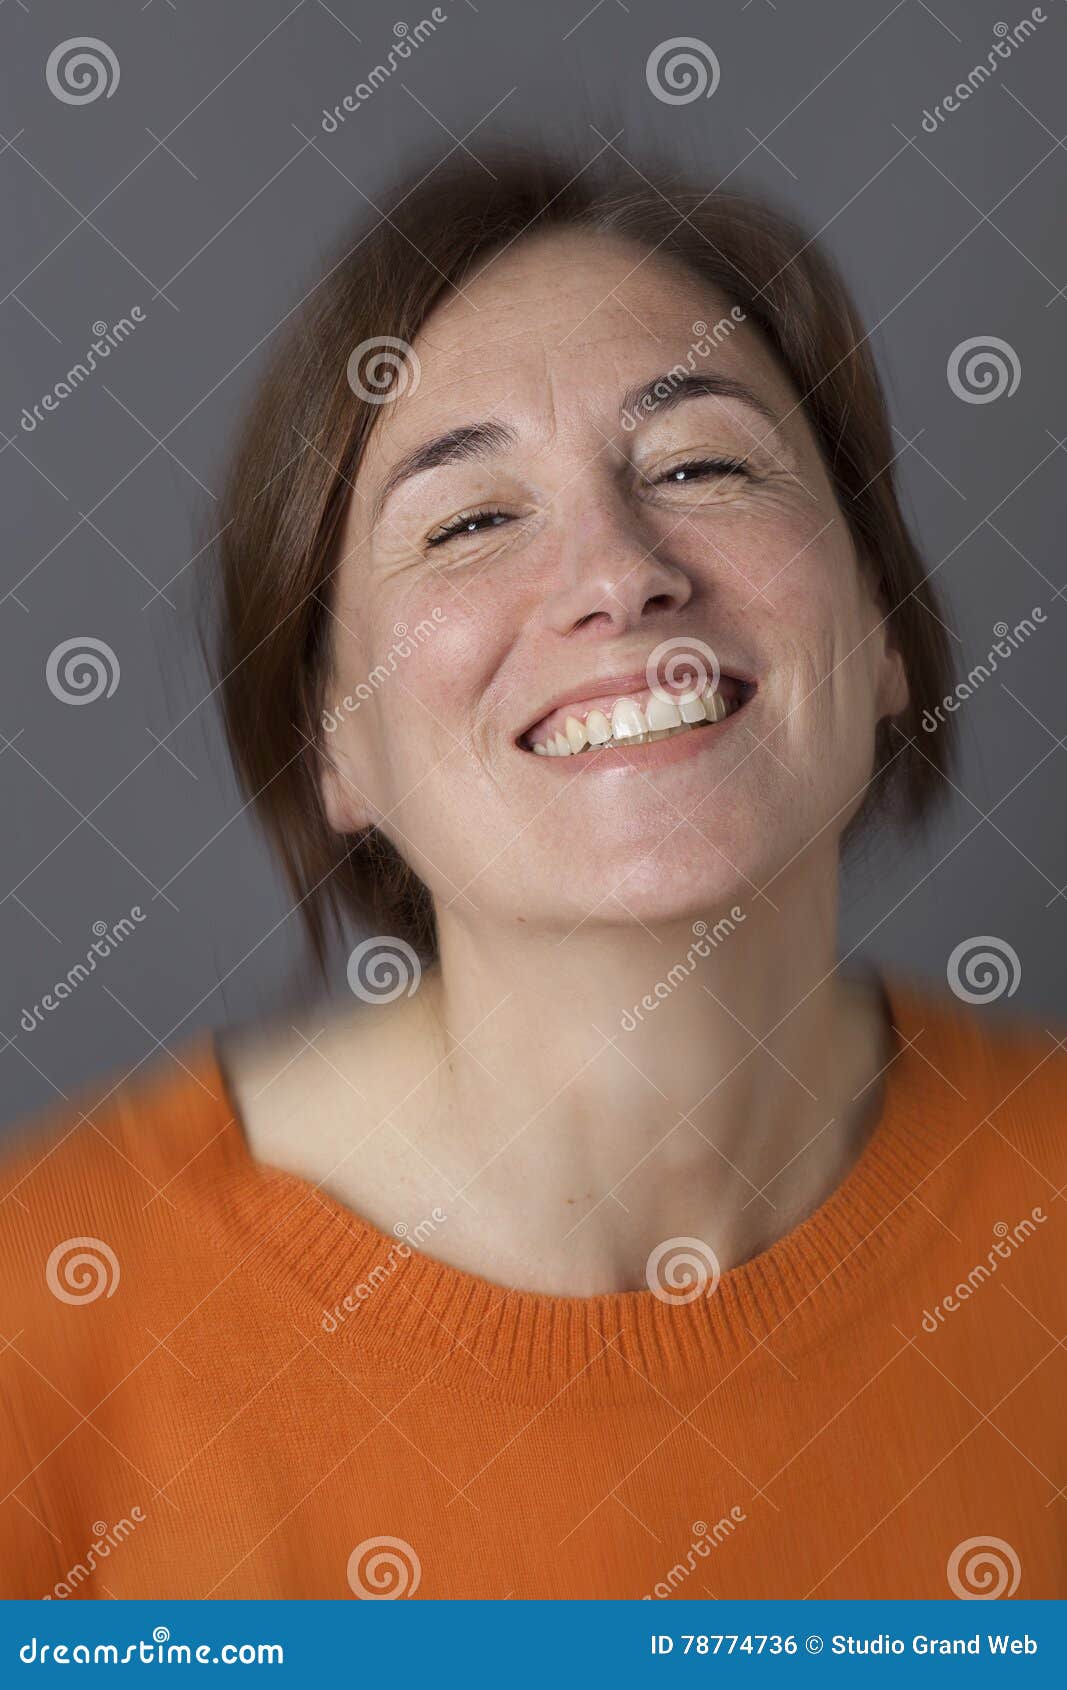 thrilled middle aged woman with brown hair laughing, blur effects